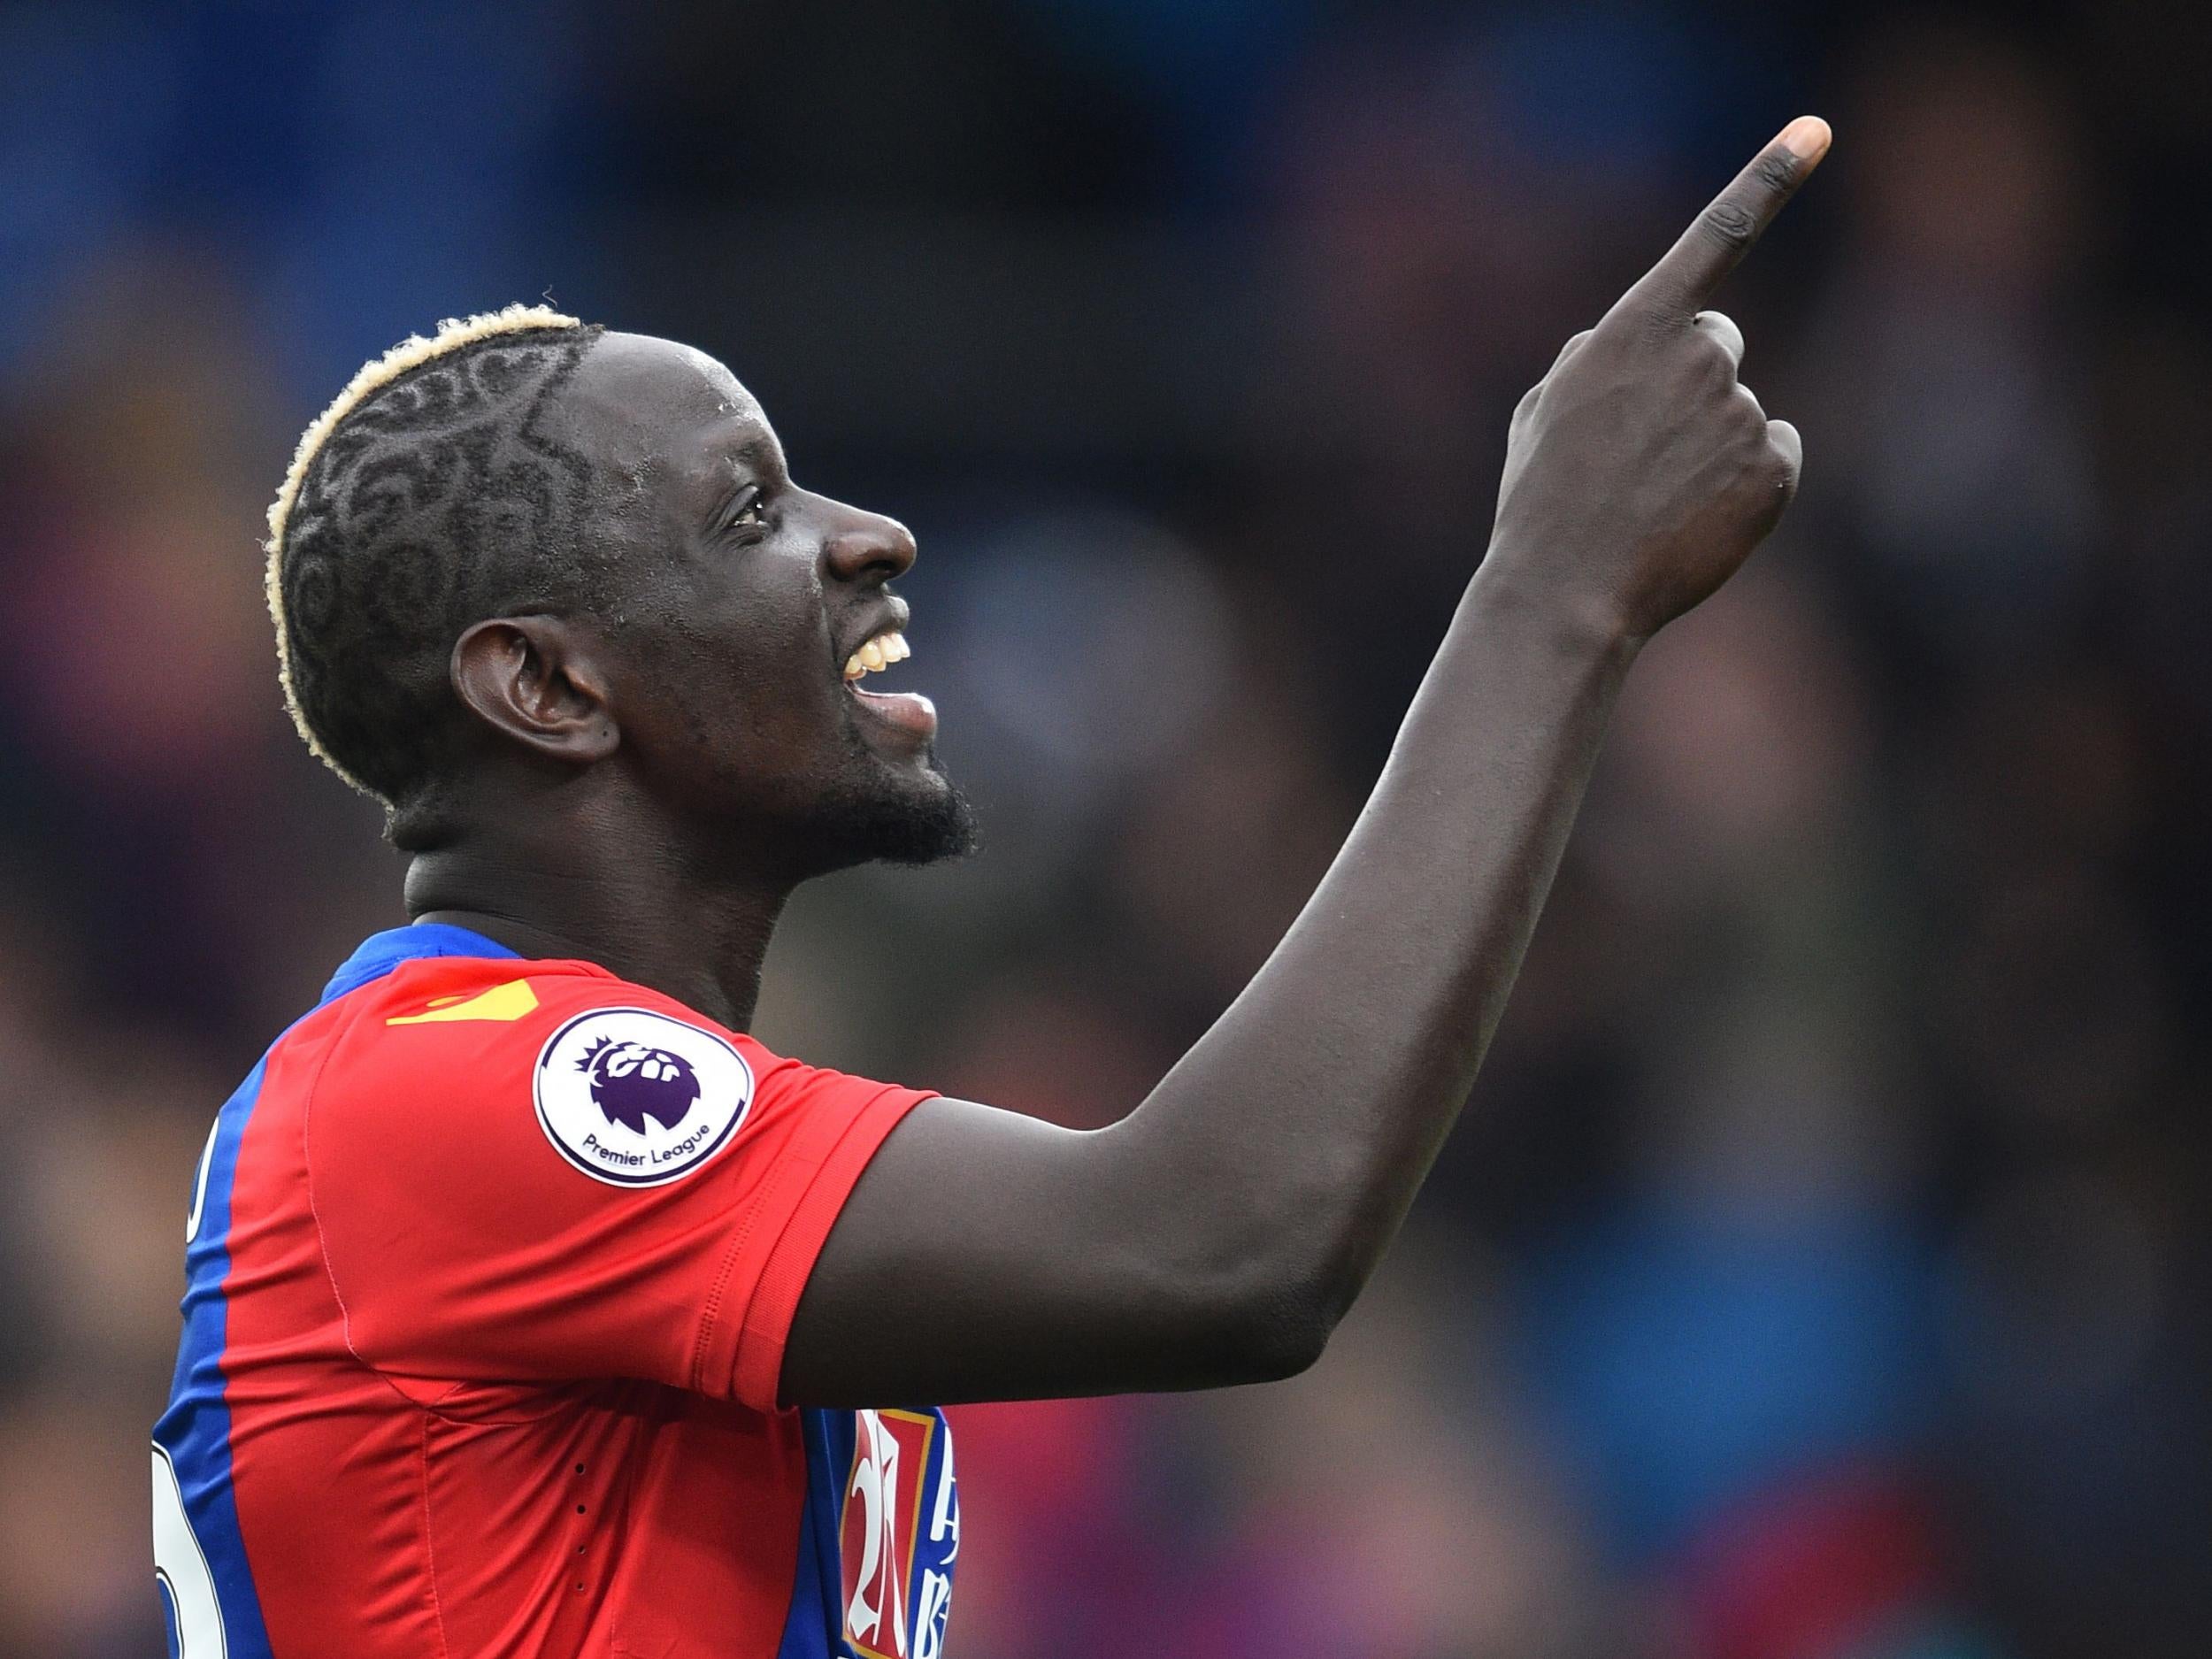 Sakho has impressed since joining Crystal Palace on a short-term loan deal